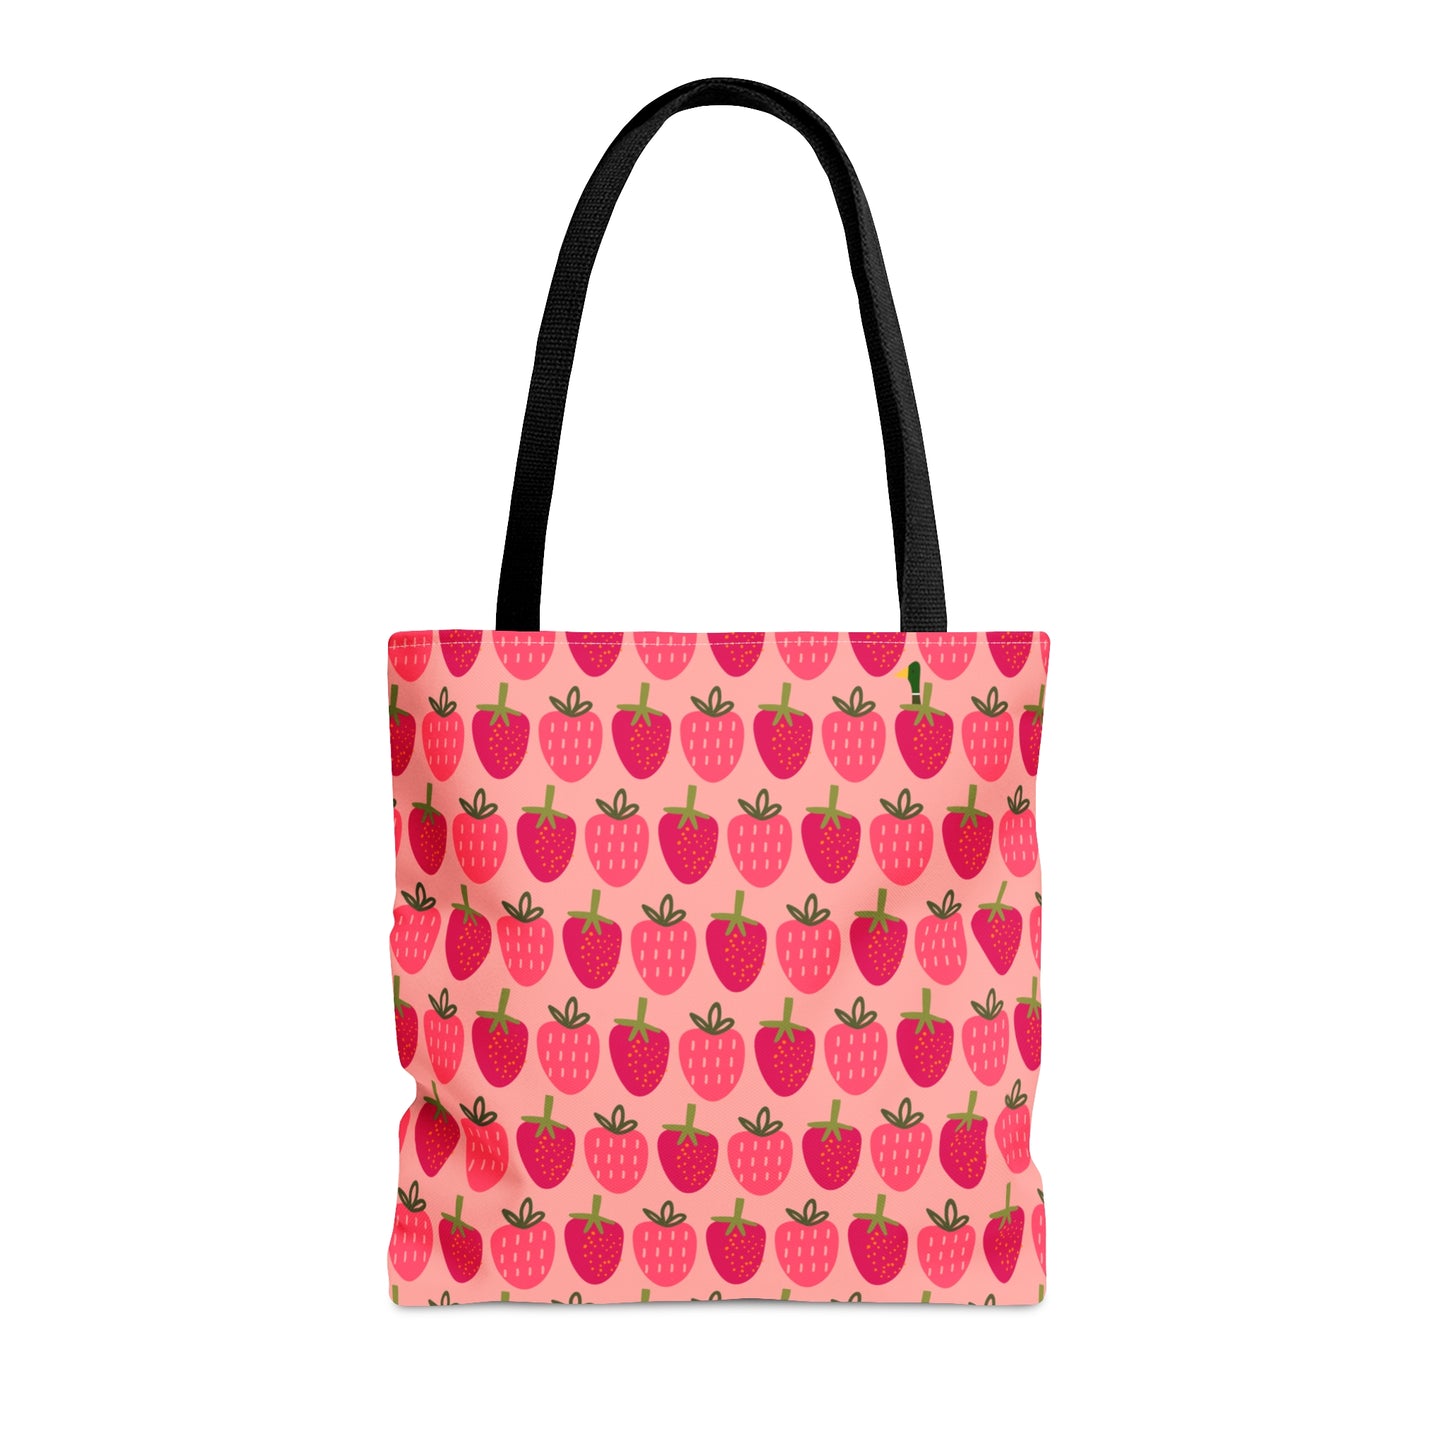 Sweet as a strawberry - Tote Bag - White - double side print